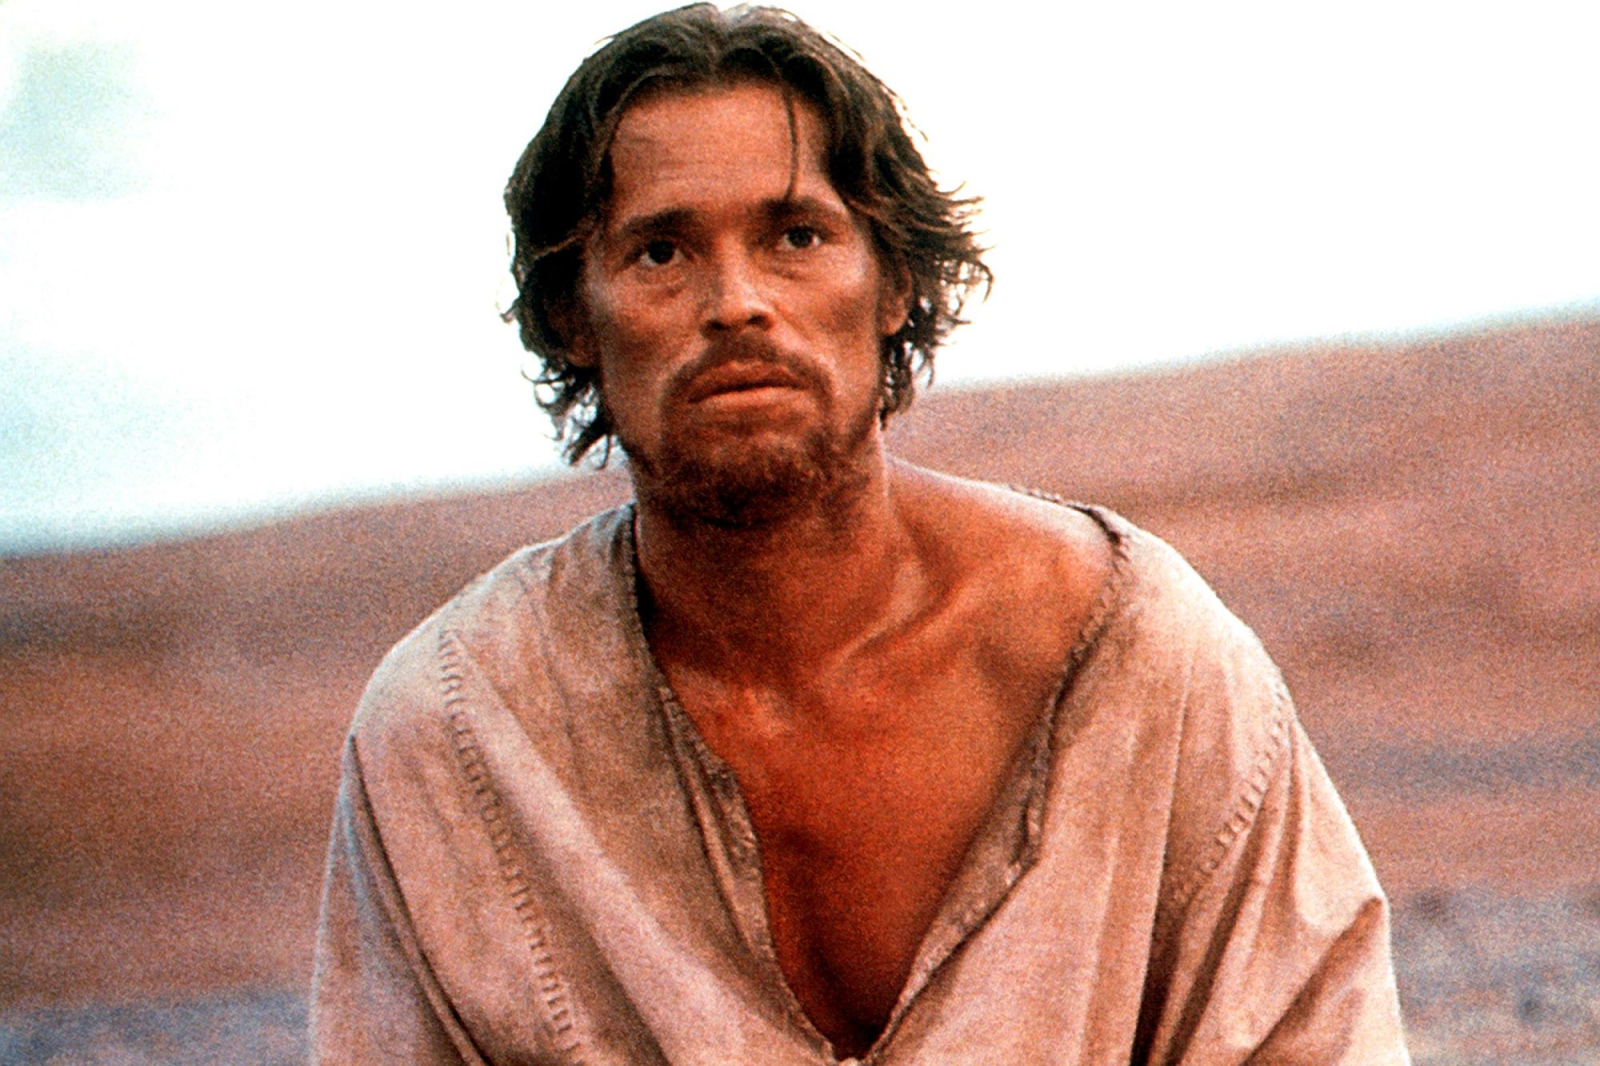 Willem in the controversial project The Last Temptation of Christ. - Entertainment Weekly 